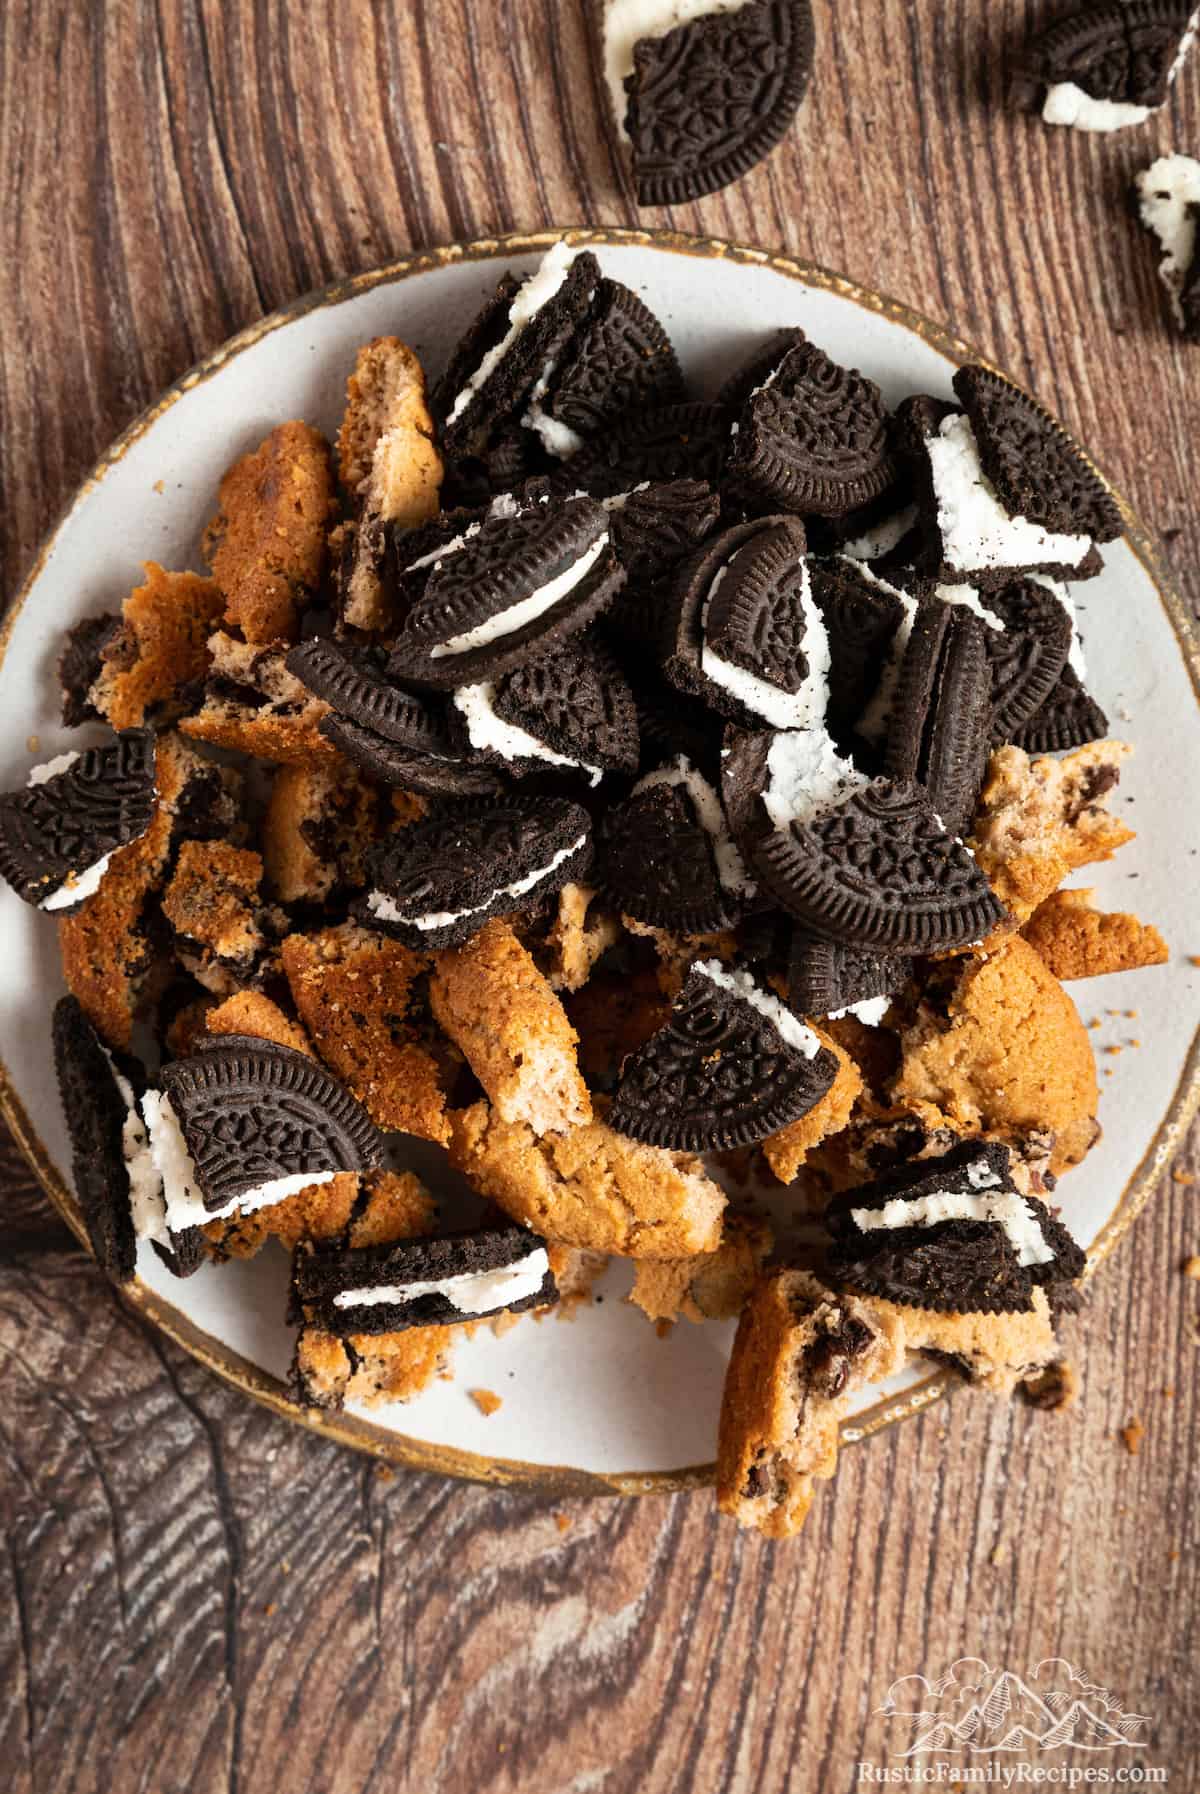 Chopped Oreos and chocolate chip cookies on a plate.